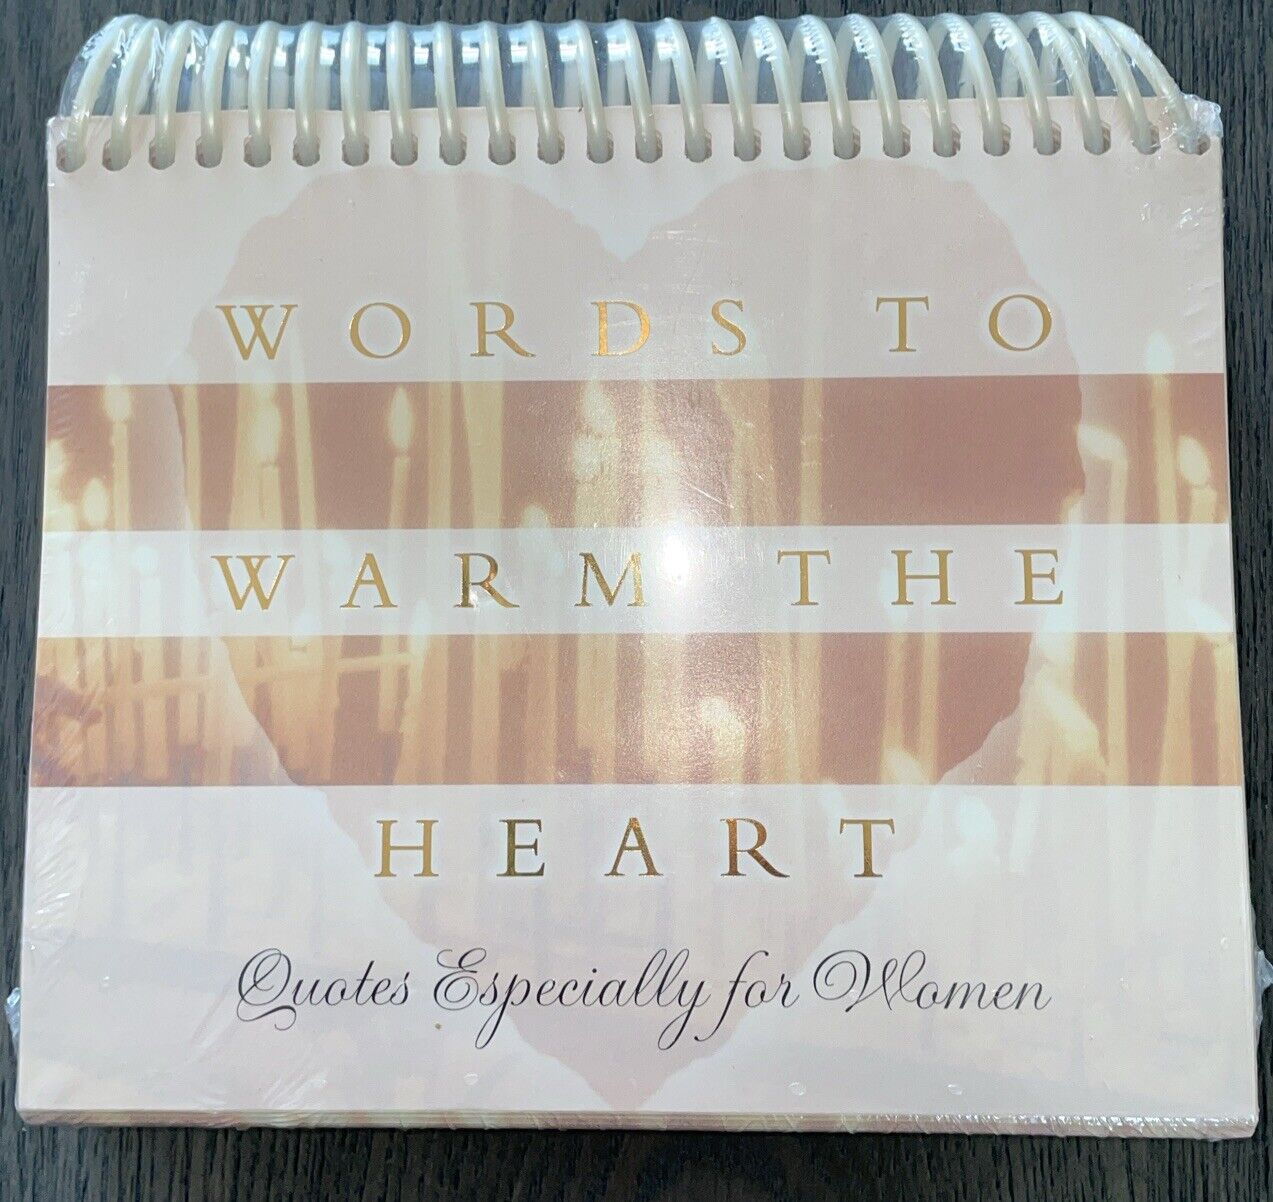 Words To Warm The Heart Desk Perpetual Flip Calendar Blessings Unlimited